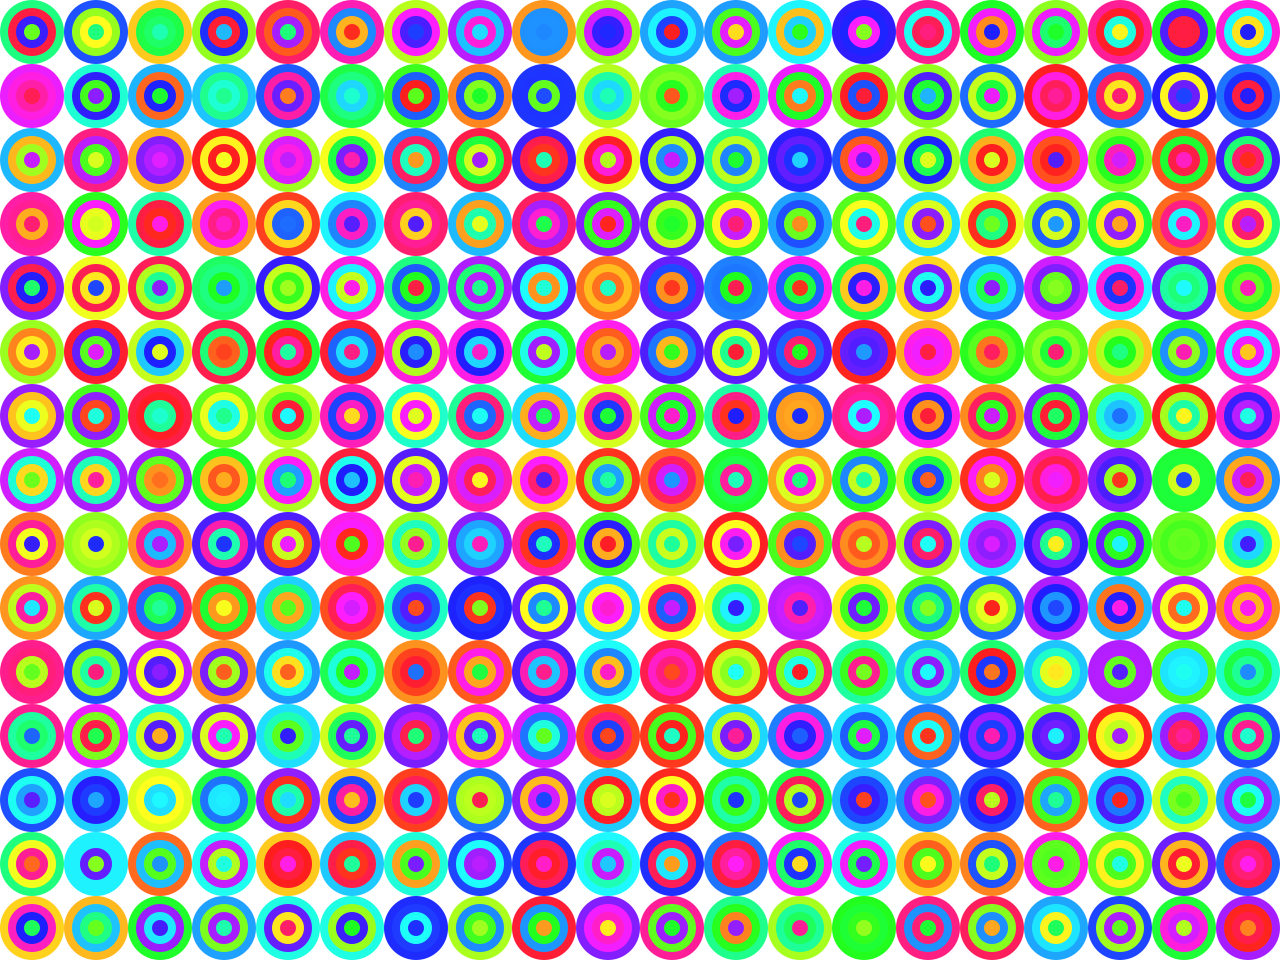 File:Color circles 15 x 20 - Wikimedia Commons